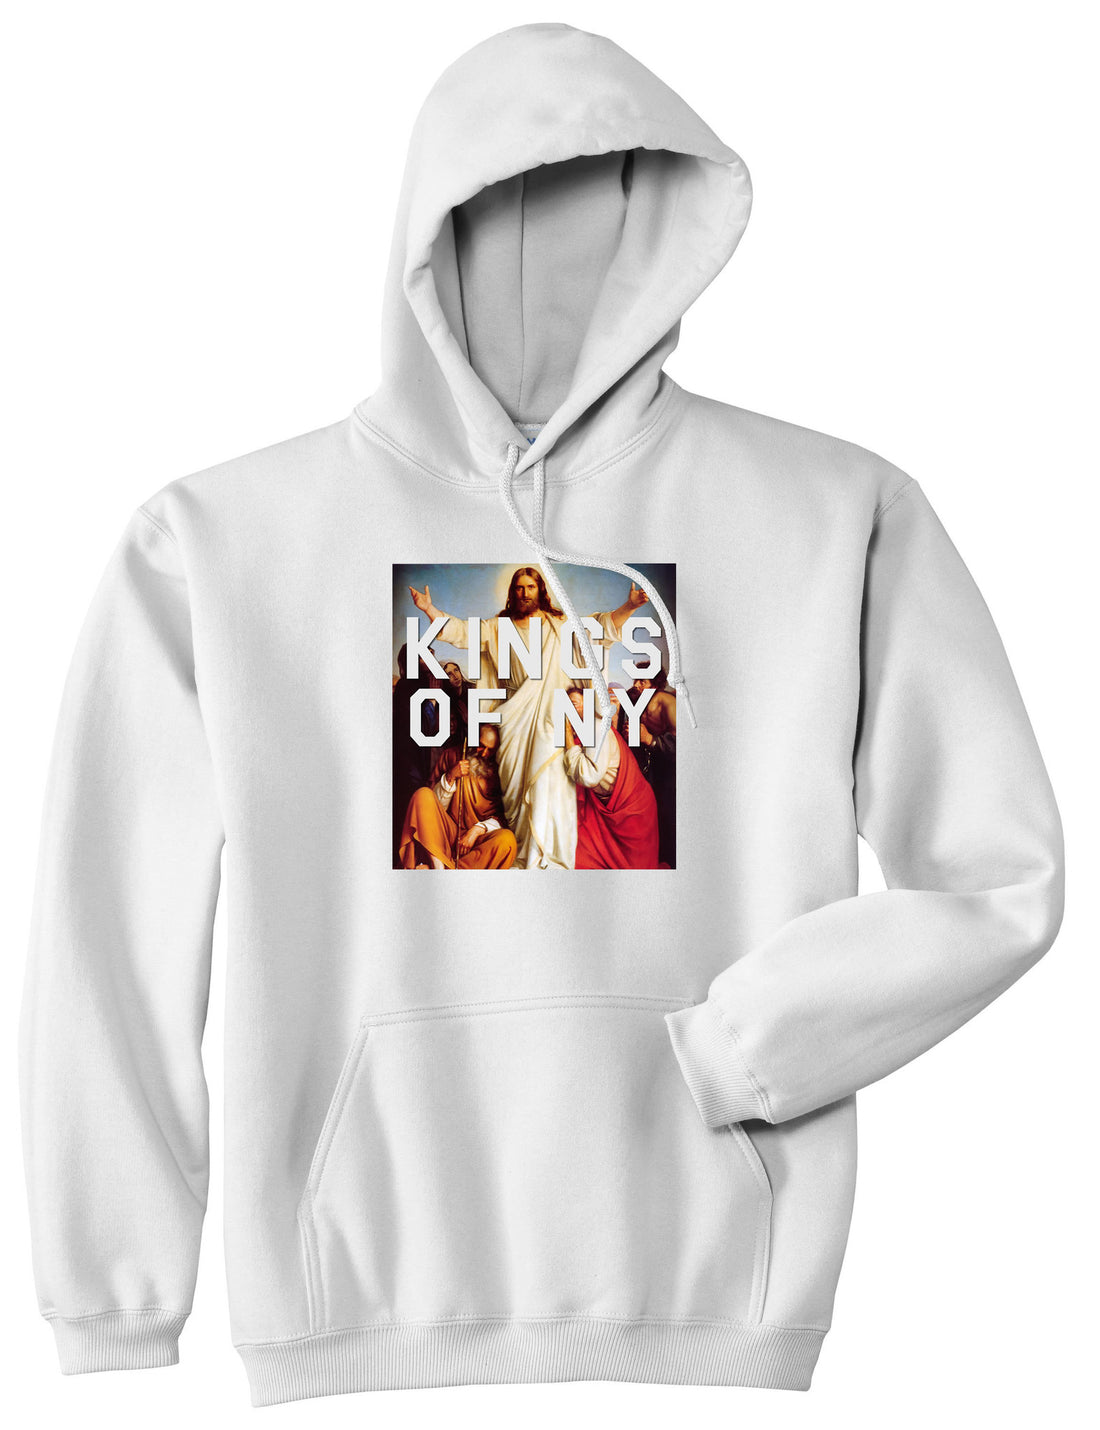 Jesus Worship and Praise of Power Pullover Hoodie in White By Kings Of NY